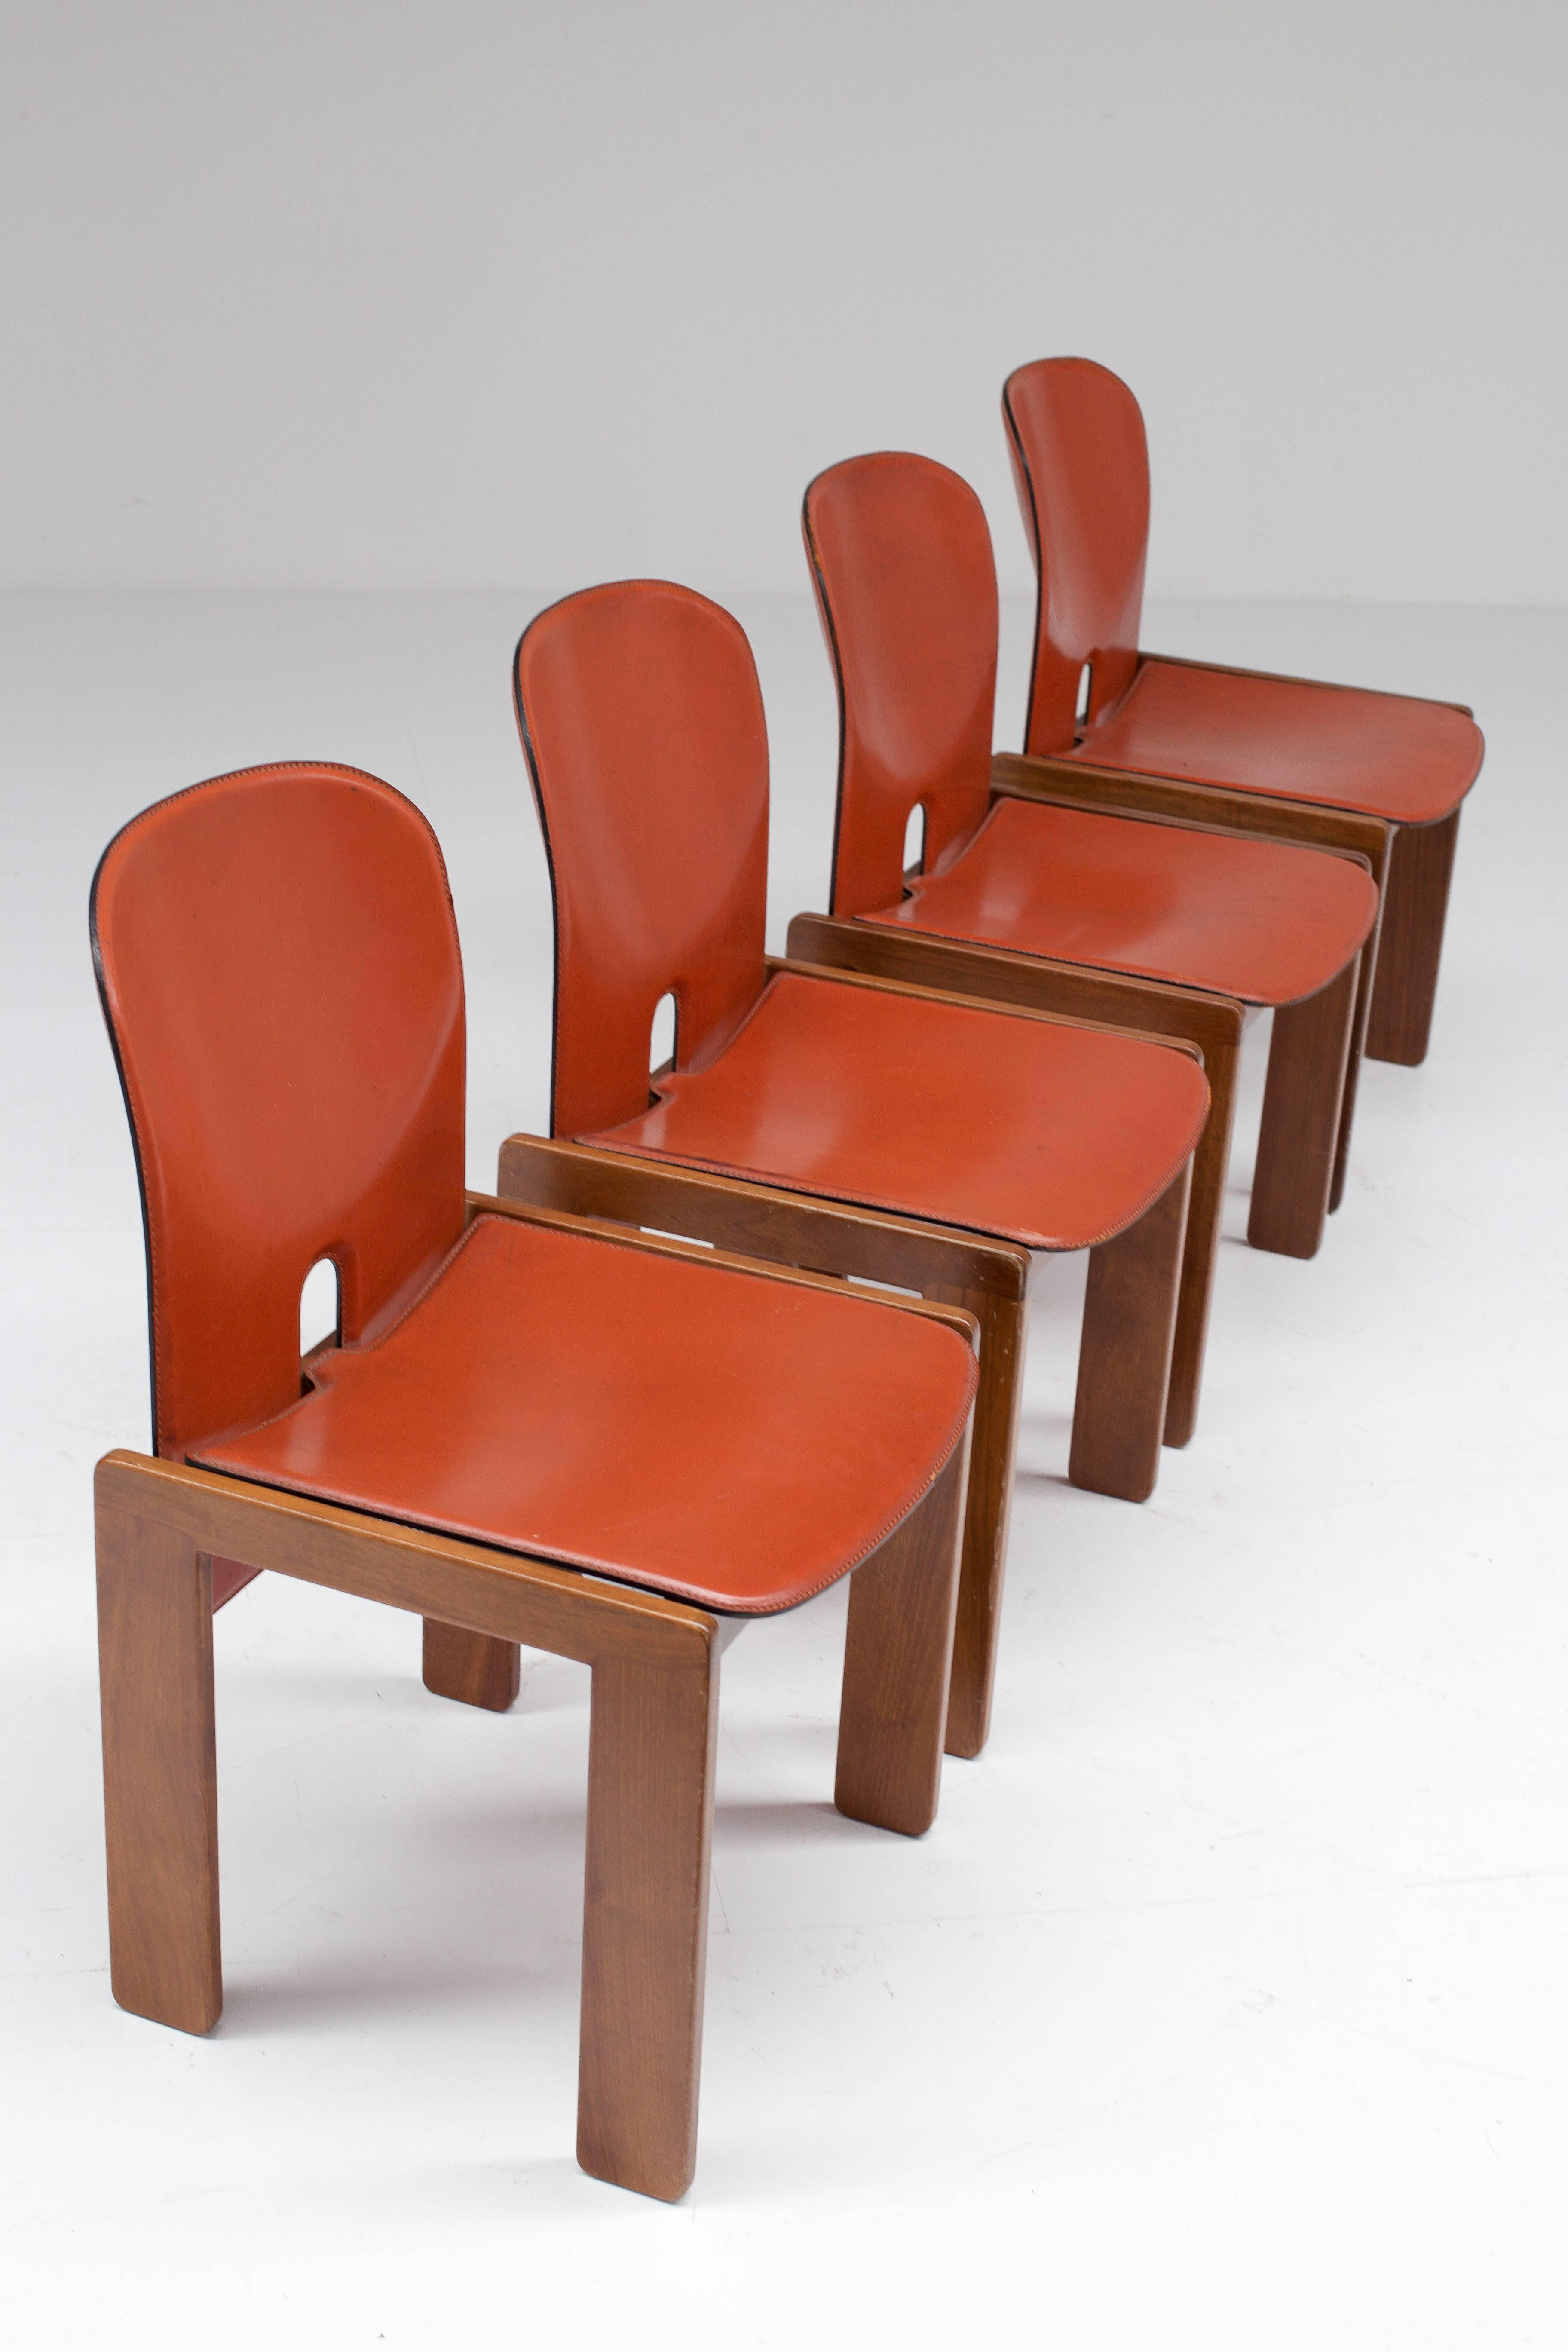 Mid-20th Century Four Cognac Leather Chairs by Tobia & Afra Scarpa for Cassina